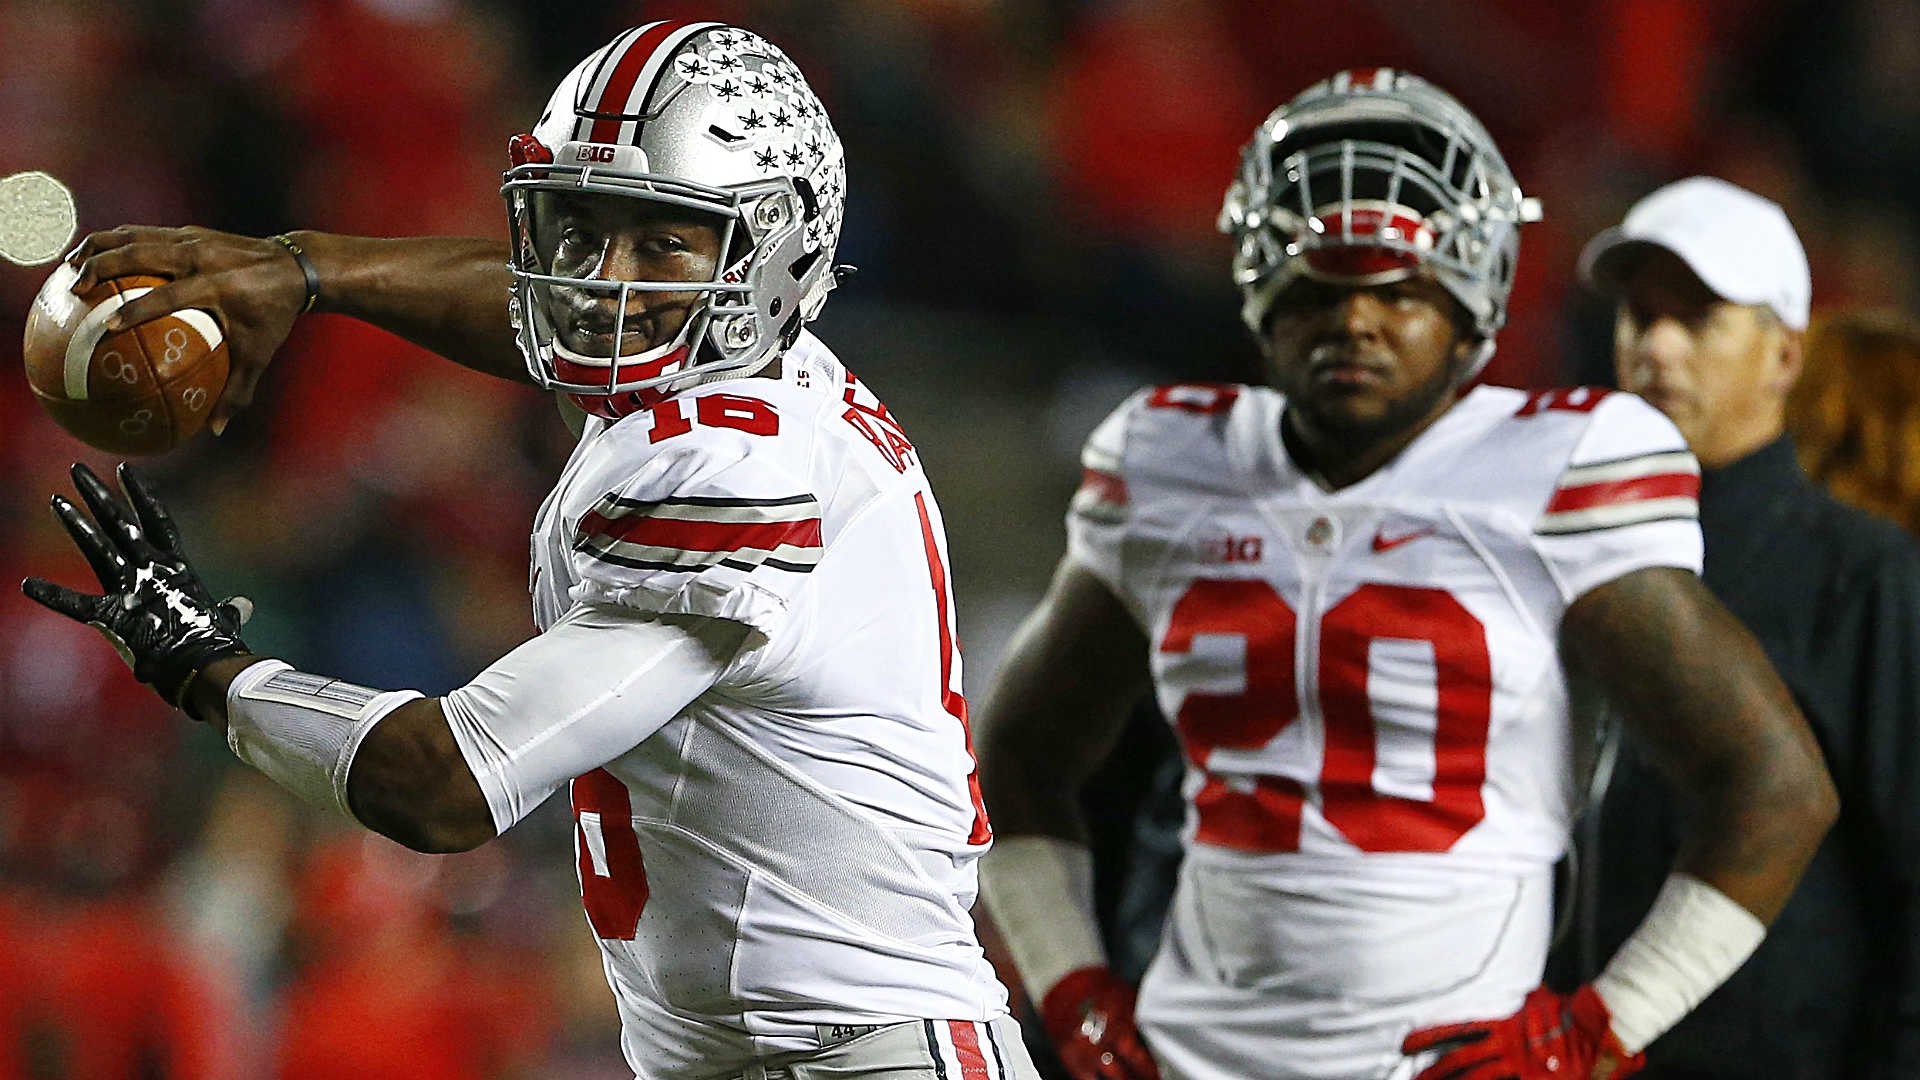 Ohio State Rutgers 7: Five things we learned